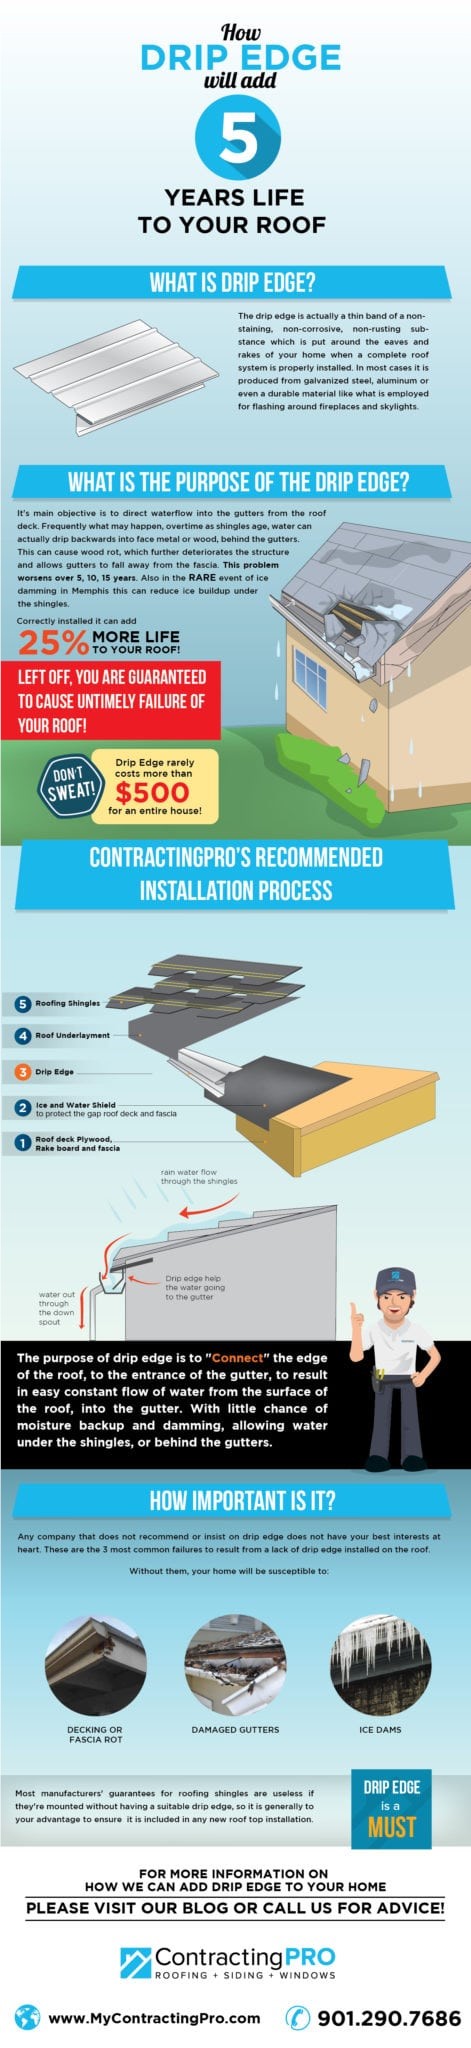 How Drip Edge could add FIVE YEARS to the life of your Roof!